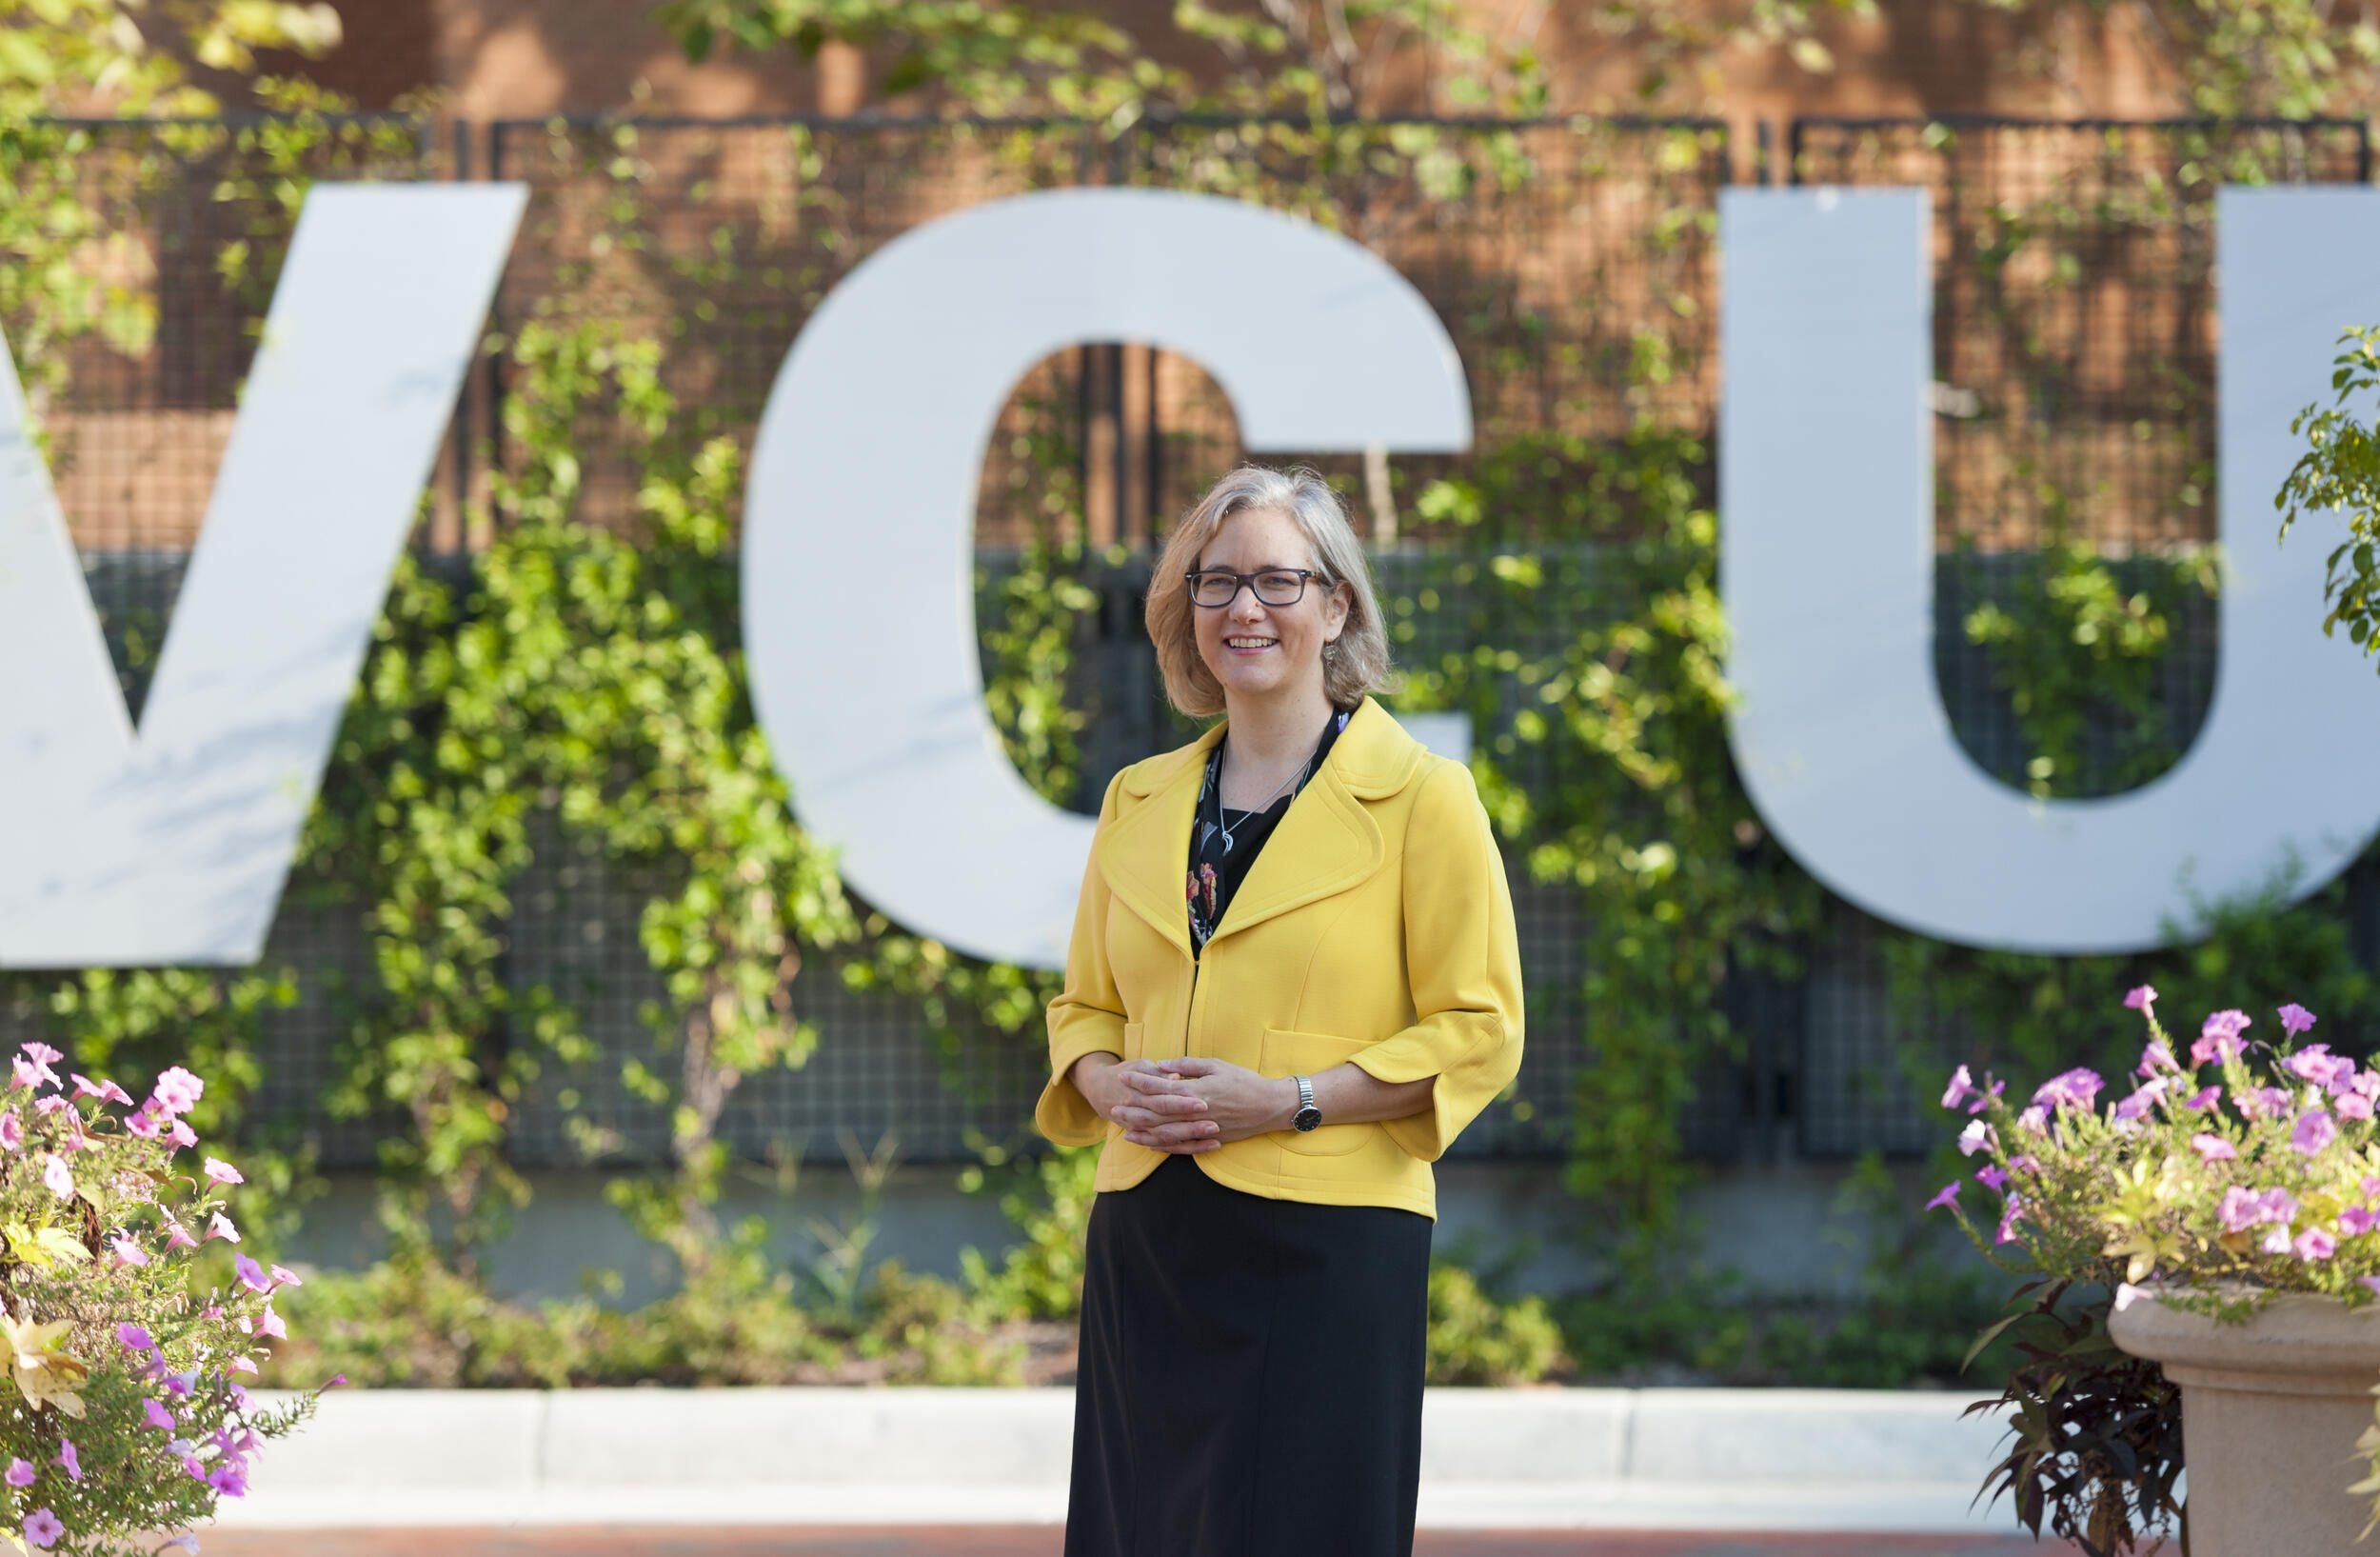 Beth Angell, Ph.D. standing in front of a \"VCU\" letter sign 